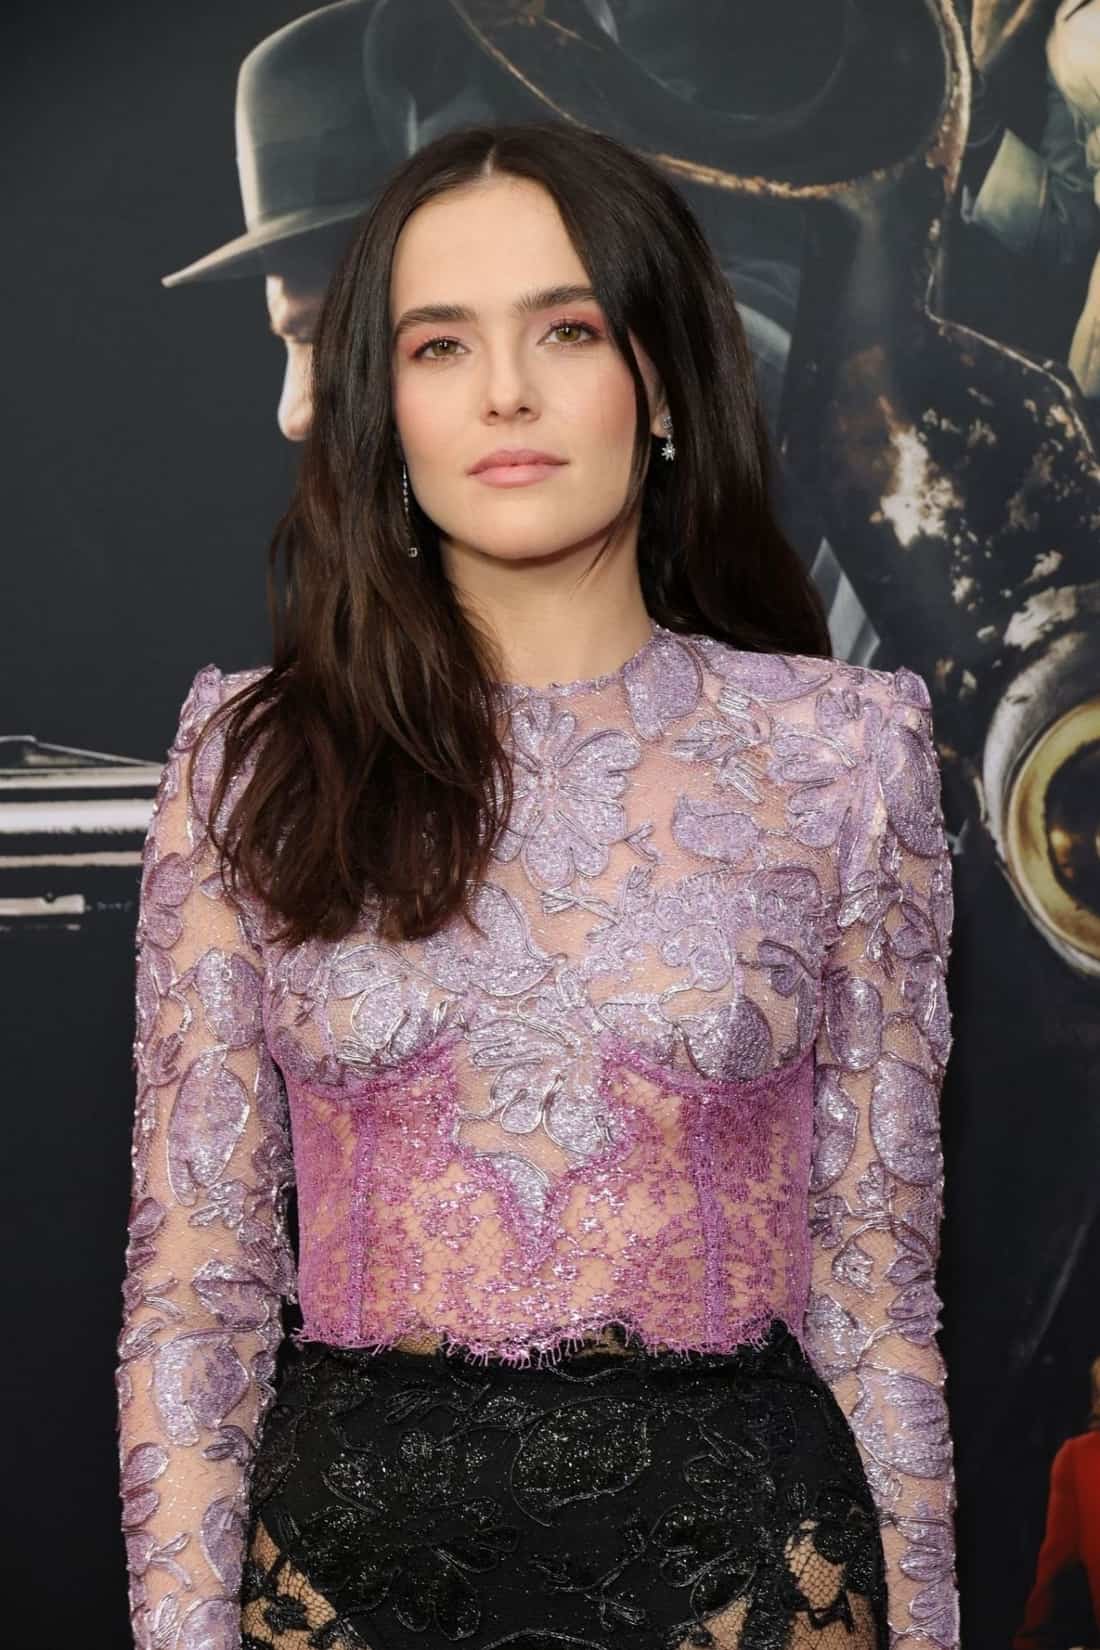 Zoey Deutch Wore a Daring Sheer Lace Dress at the Screening of "The Outfit"